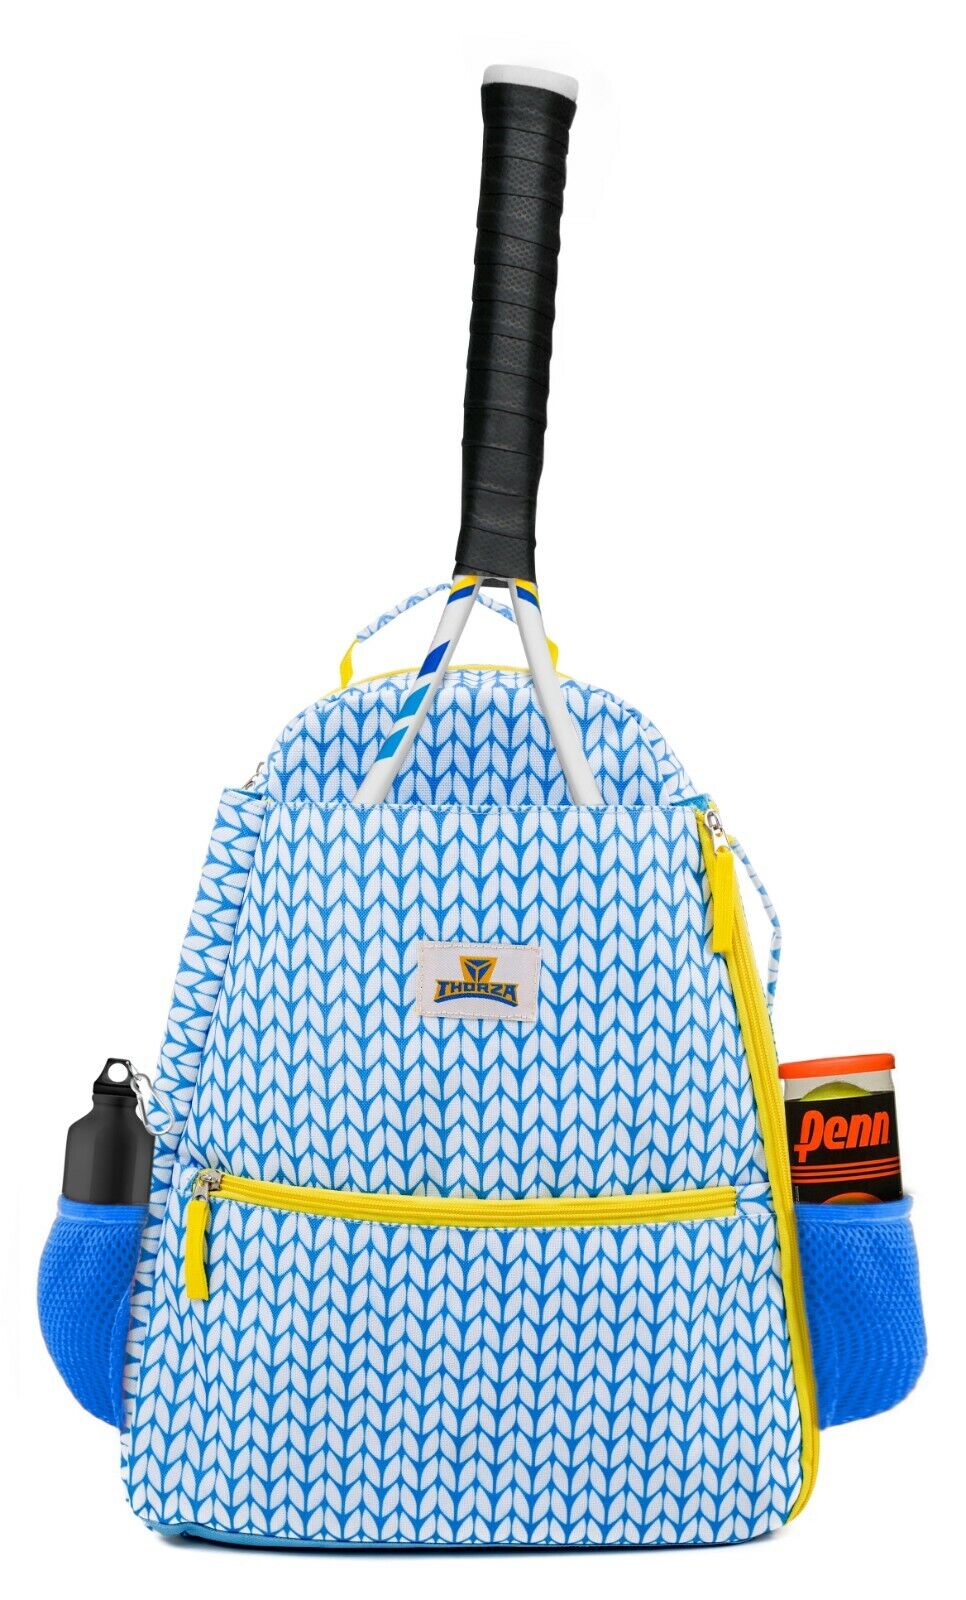 Backpack For Women Stores 2 Rackets, Balls, And Sports Gear